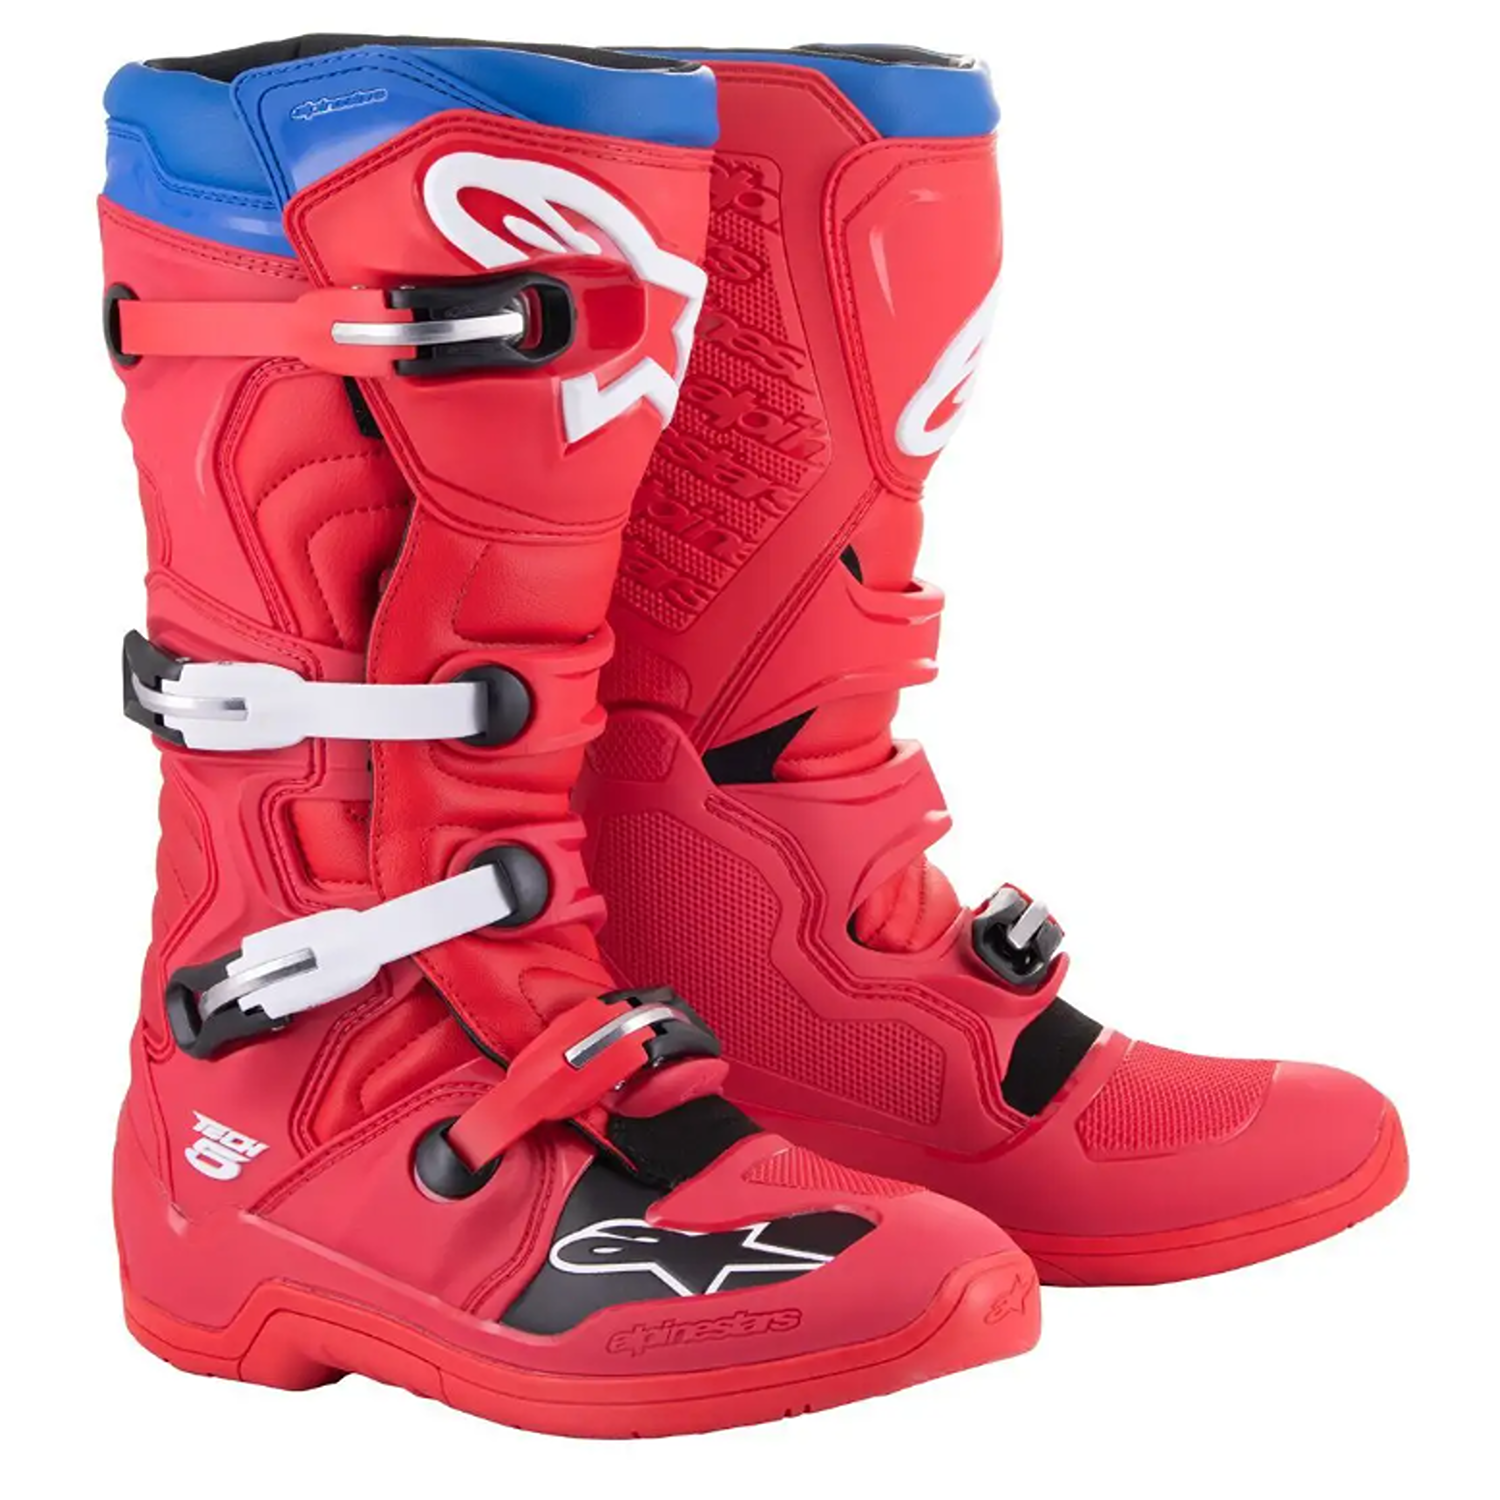 Image of Alpinestars Tech 5 Boots Bright Red Dark Red Blue Taille US 15